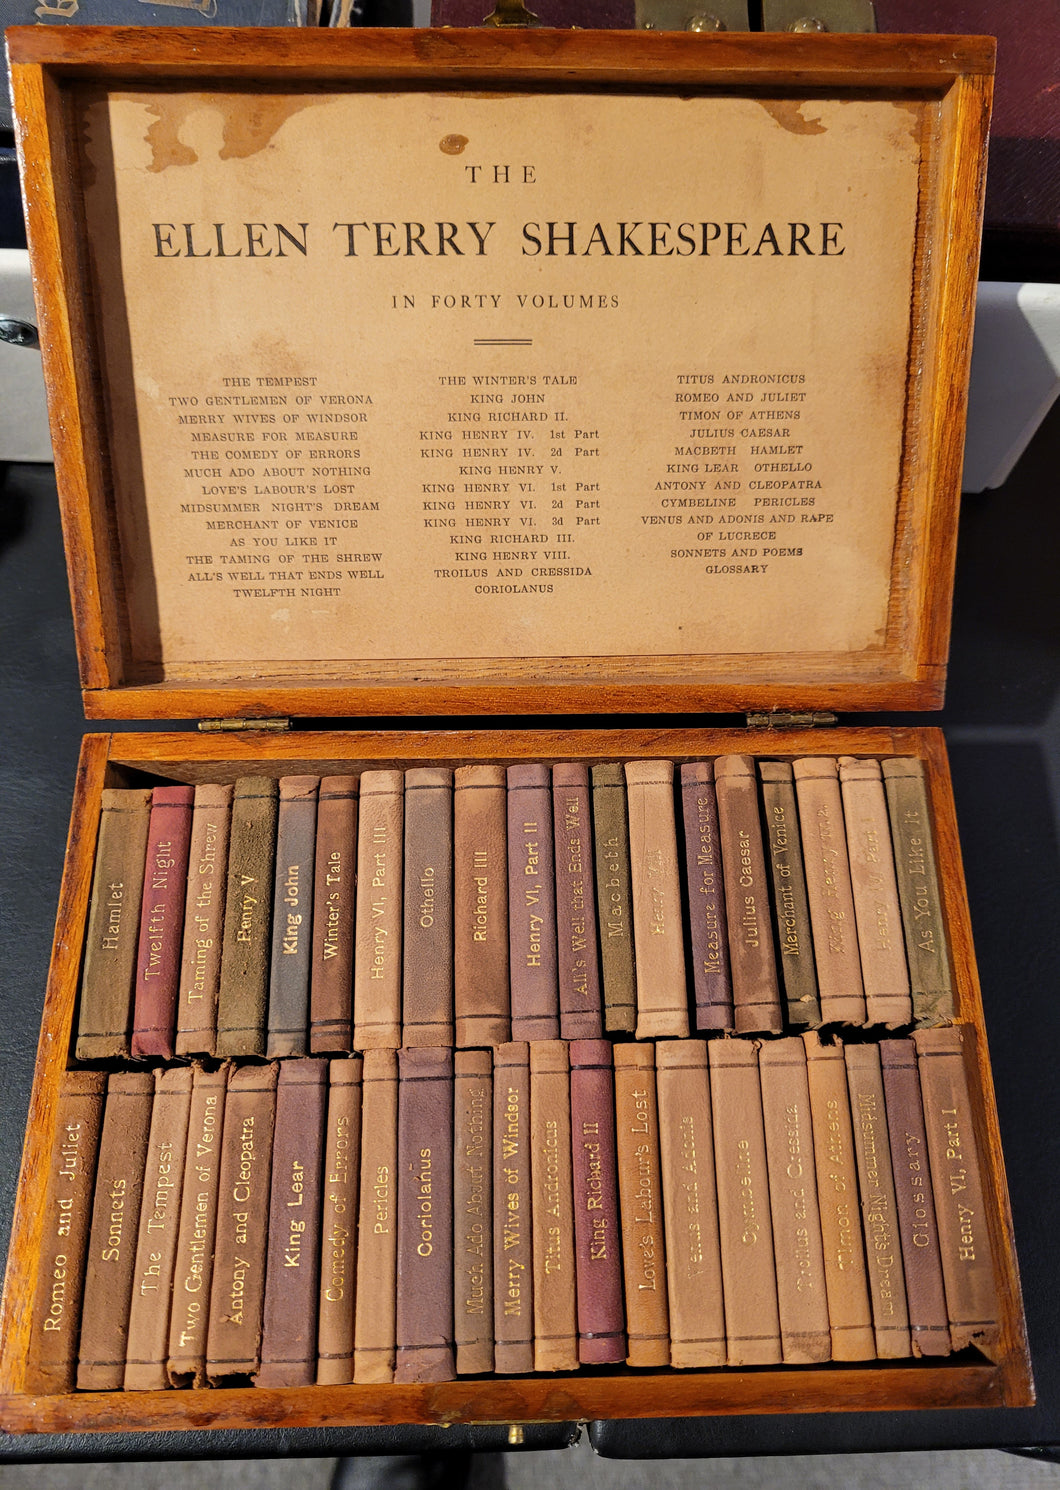 Oak Box containing the Ellen Terry Series of Shakespeare's works.